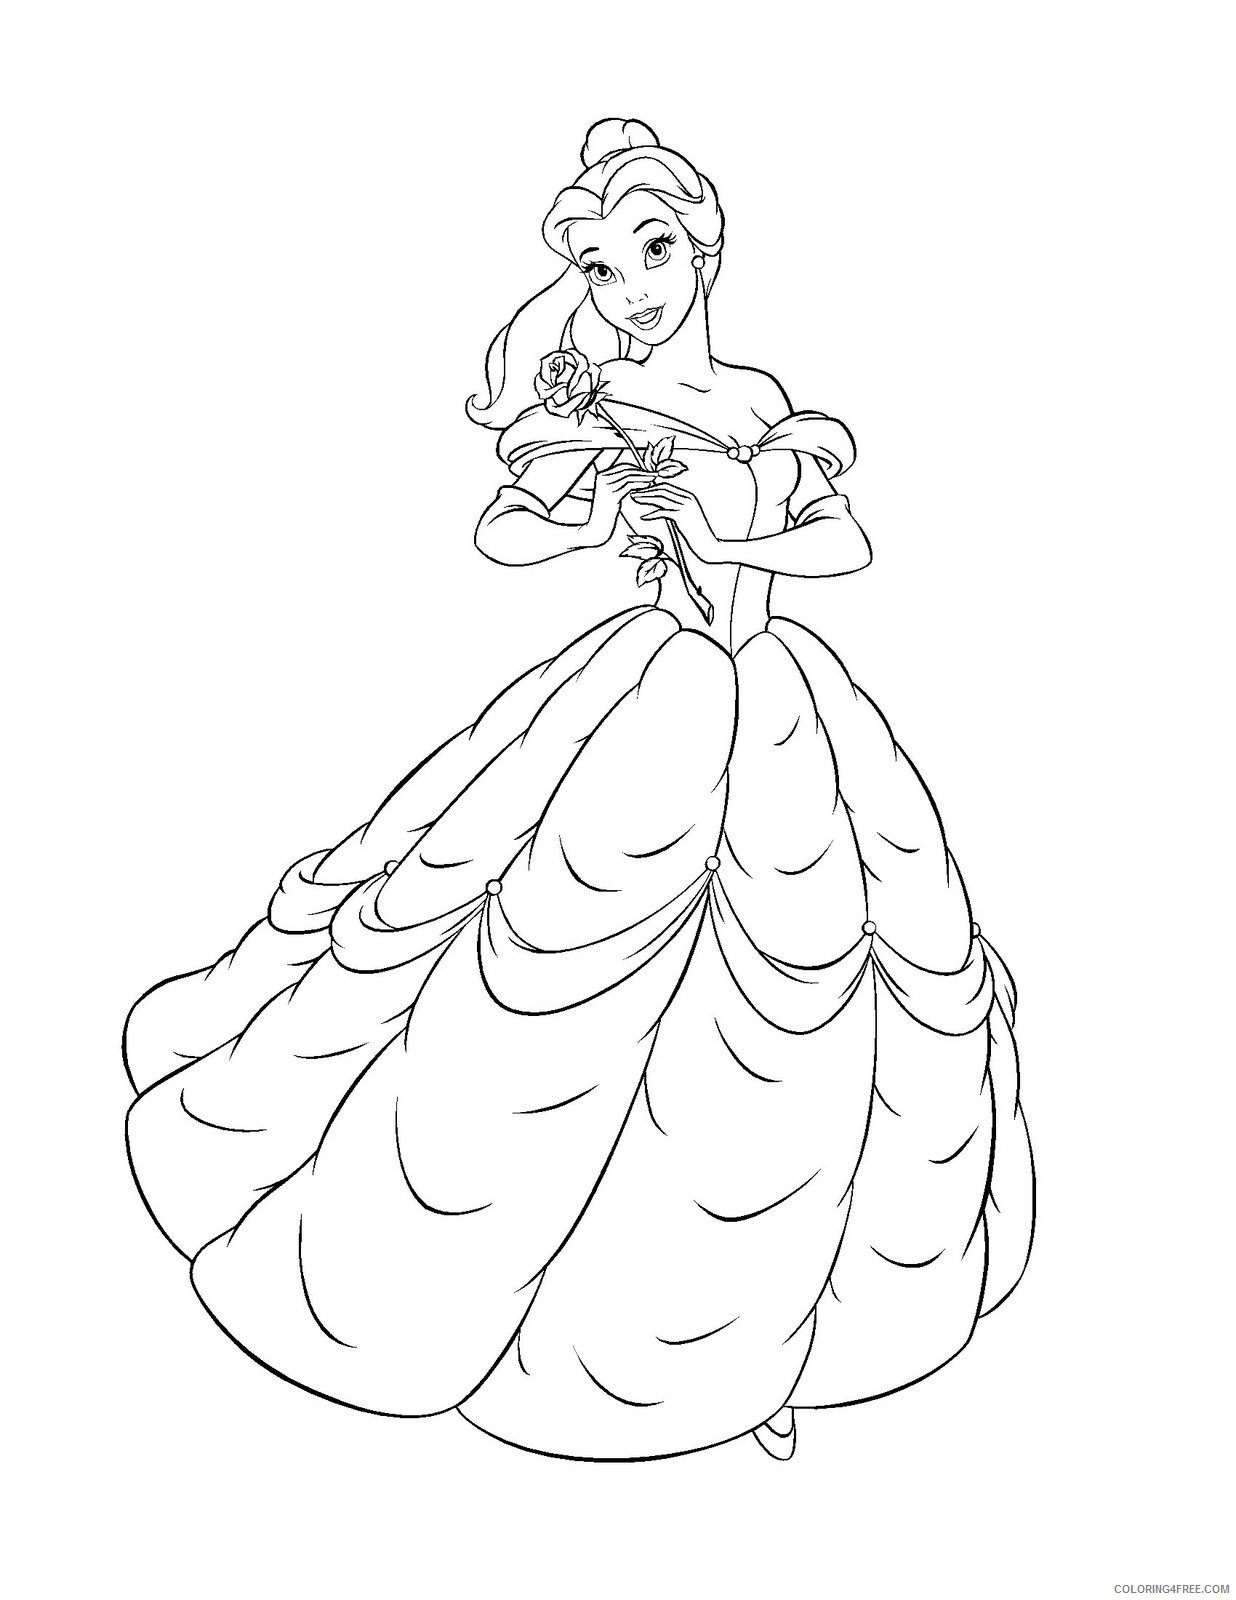 disney princess belle coloring pages Coloring4free